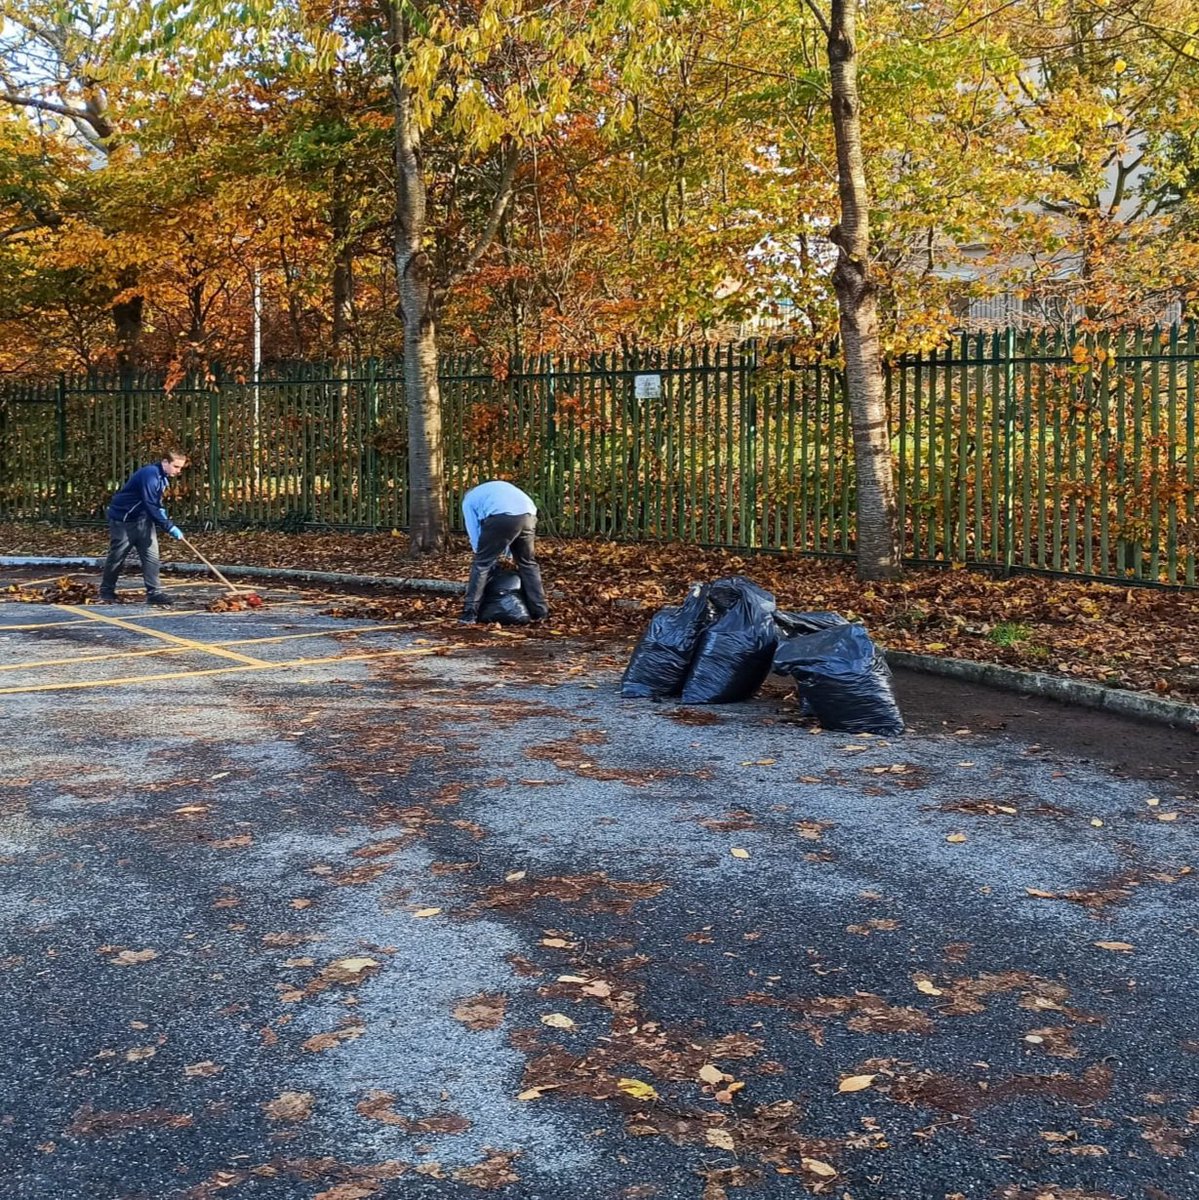 The Composting journey begins! 🍃 🍁🍂
Our Second year CSPE class under the guidance of Christy our caretaker got stuck into leaf collection, collecting over 60 bags so far! Thanks to Mr O'Brien for facilitating. #SDGs #Community #care @bitesizeSDGs @Take1_Programme #selskarstyle